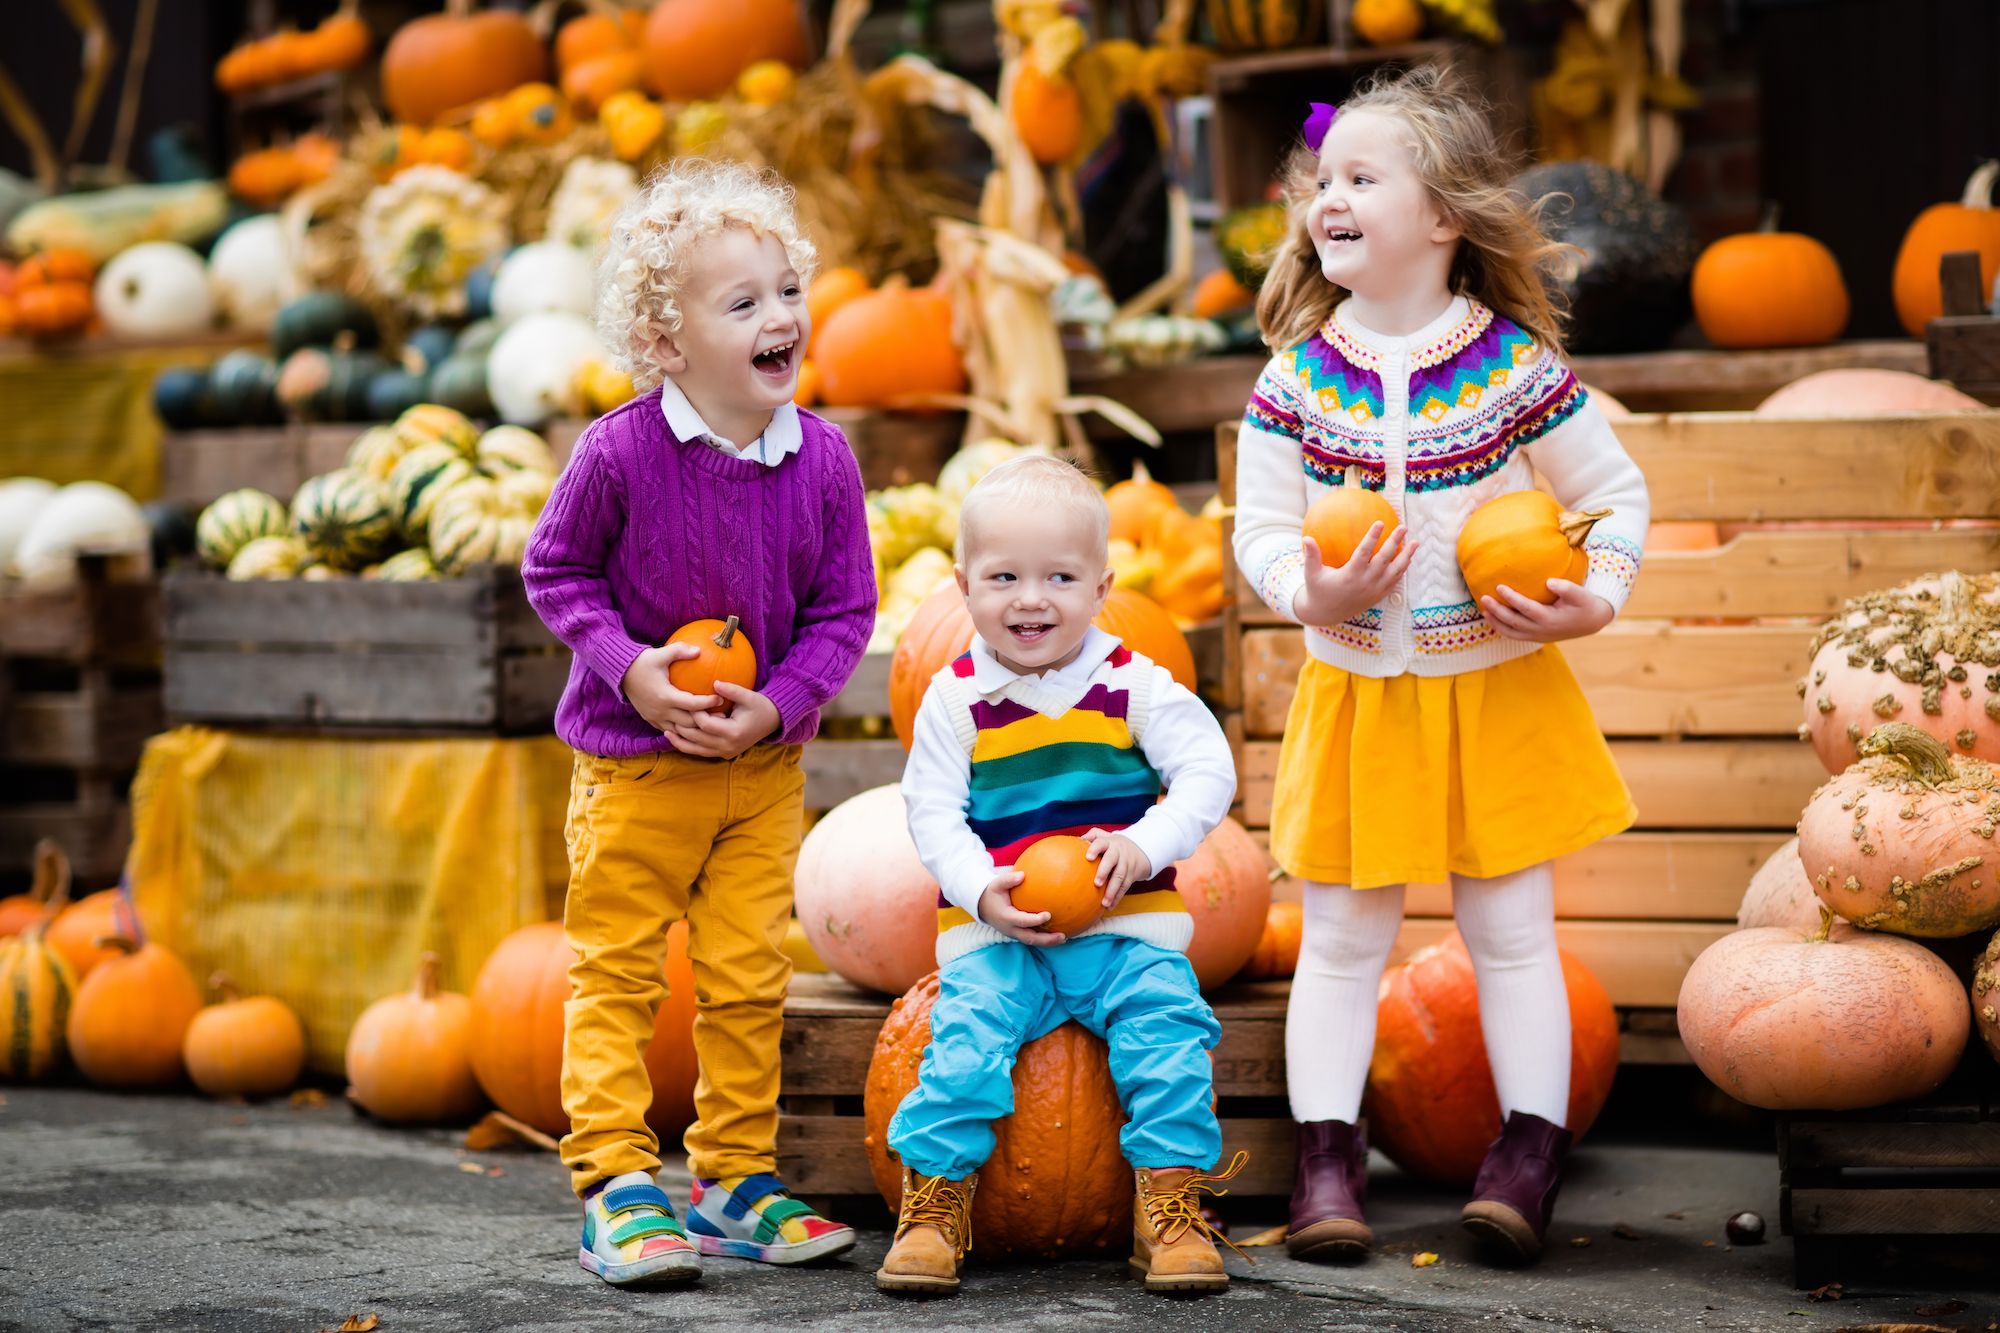 three young children pose for photos with pumpkins at a harvest festival